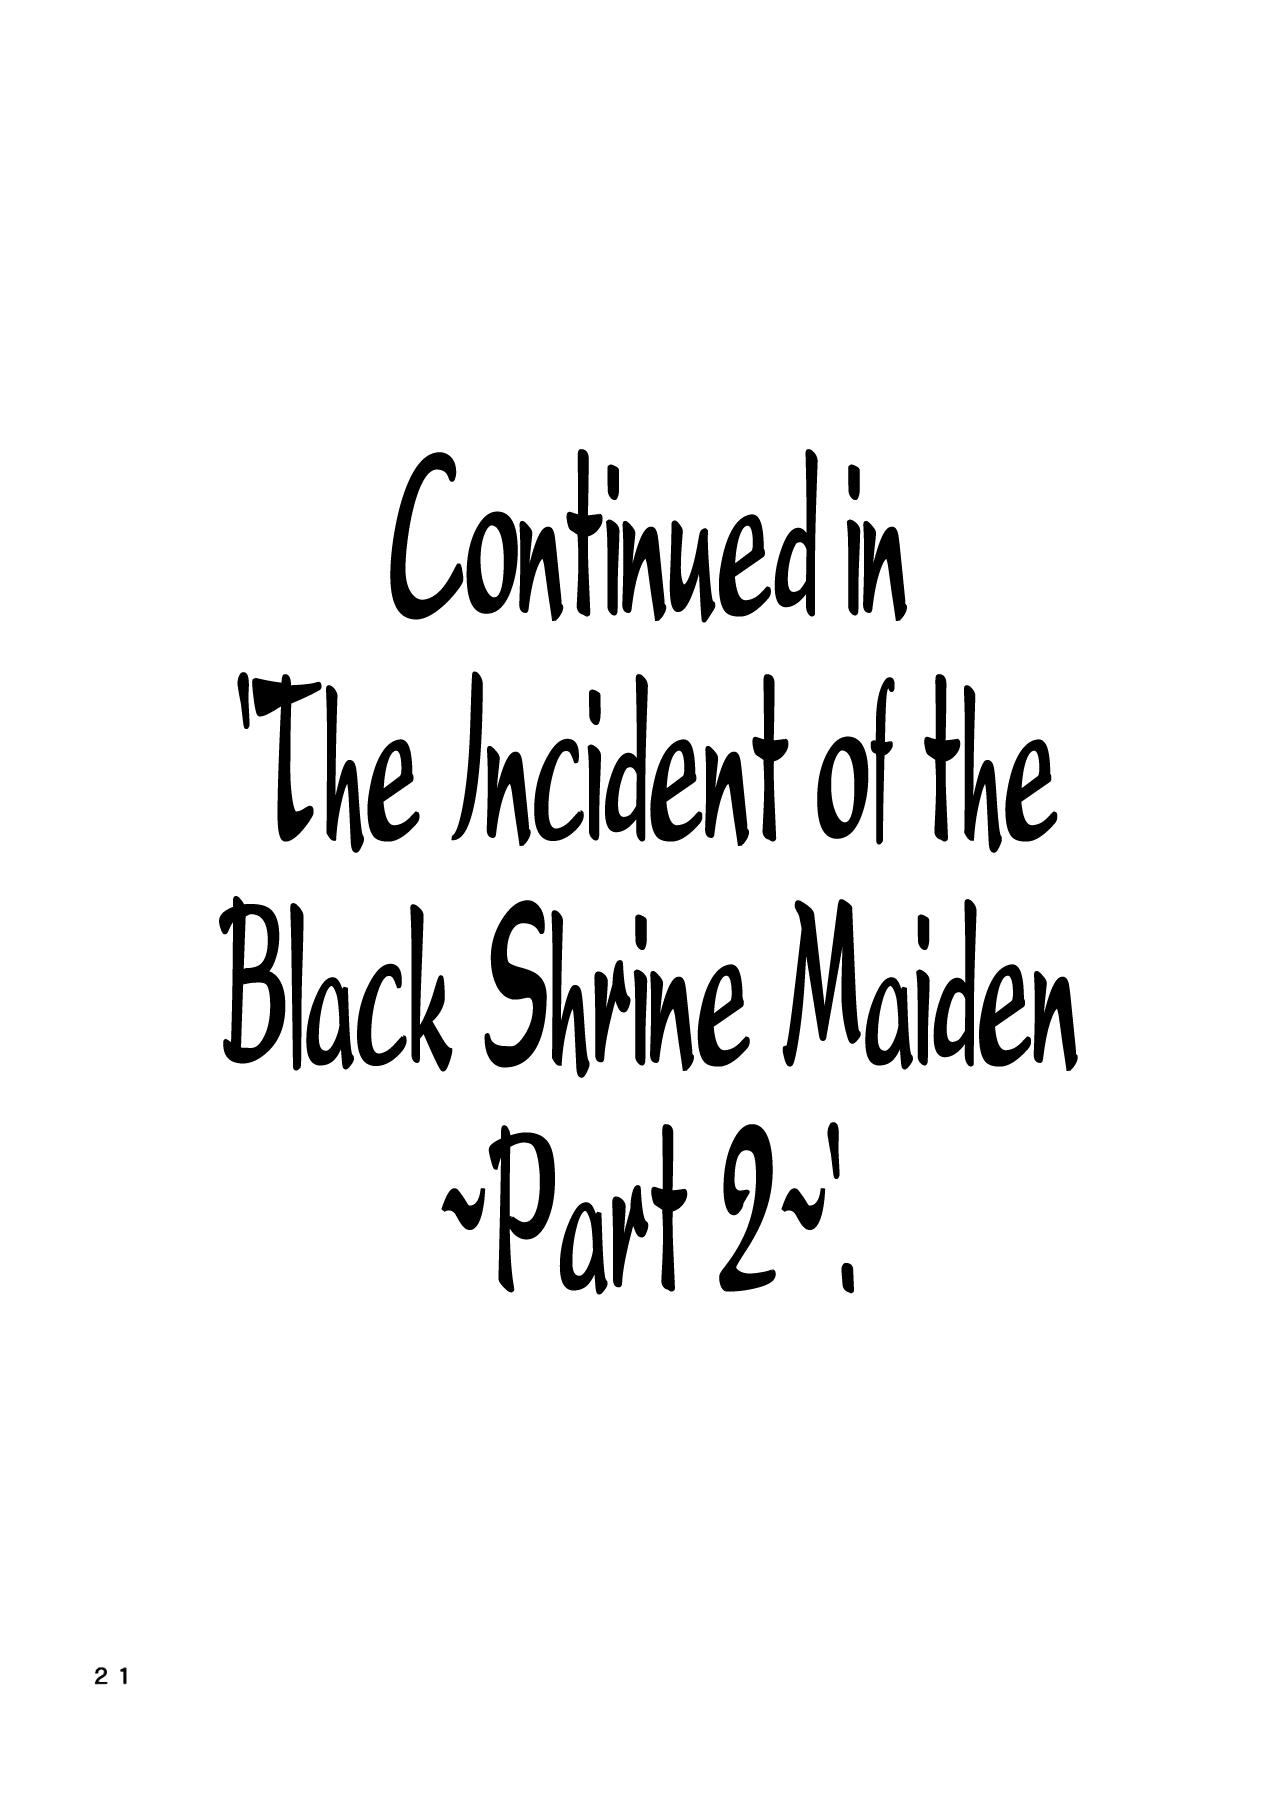 The Incident of the Black Shrine Maiden 19